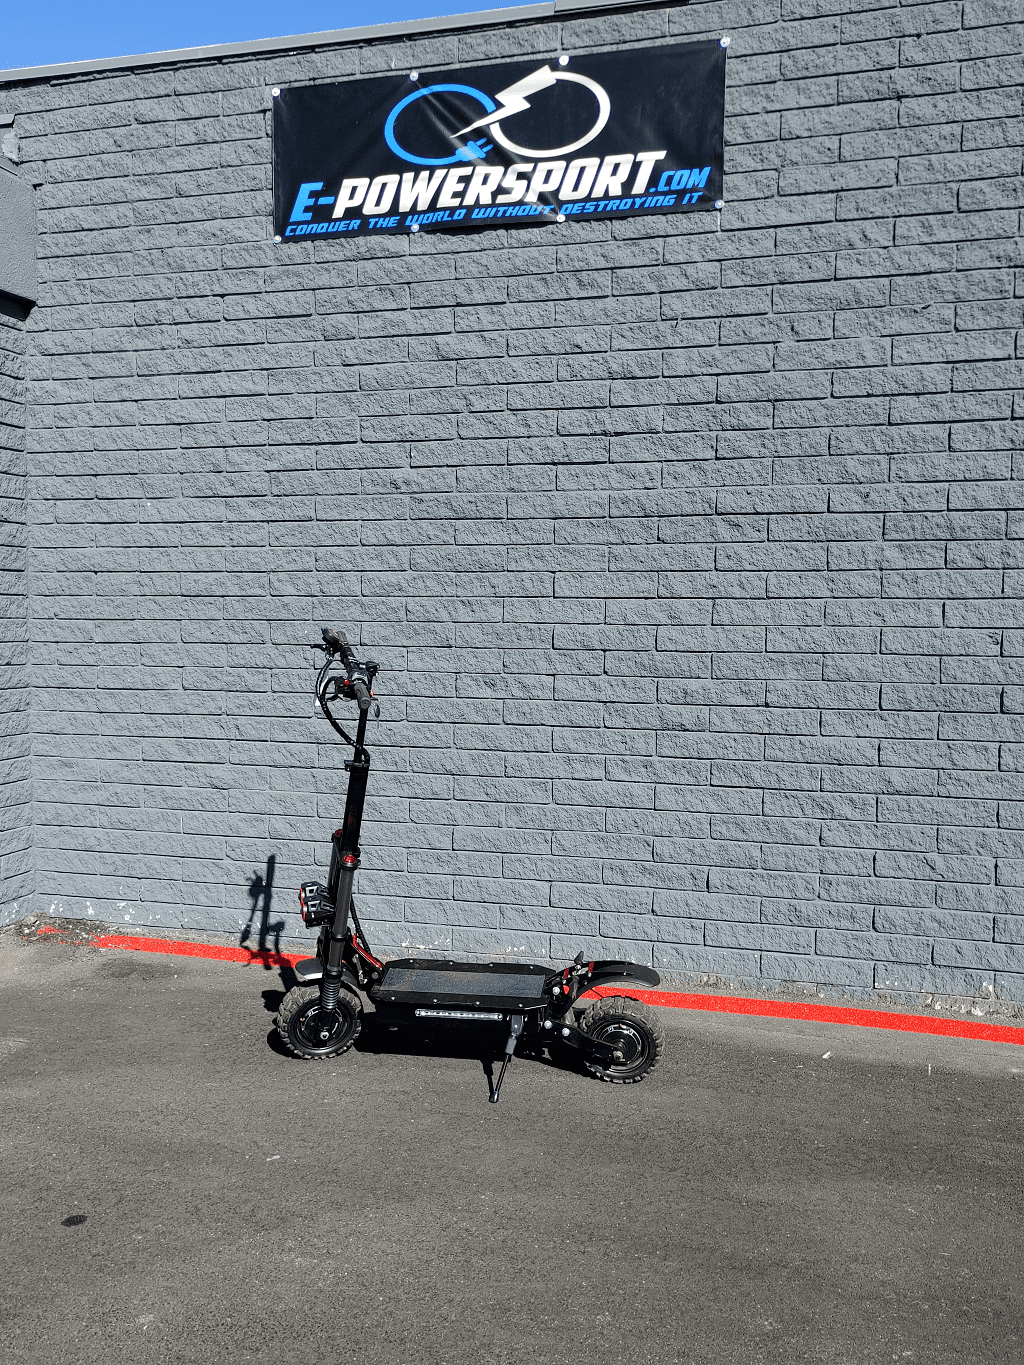  The Pros and Cons of Electric Scooters